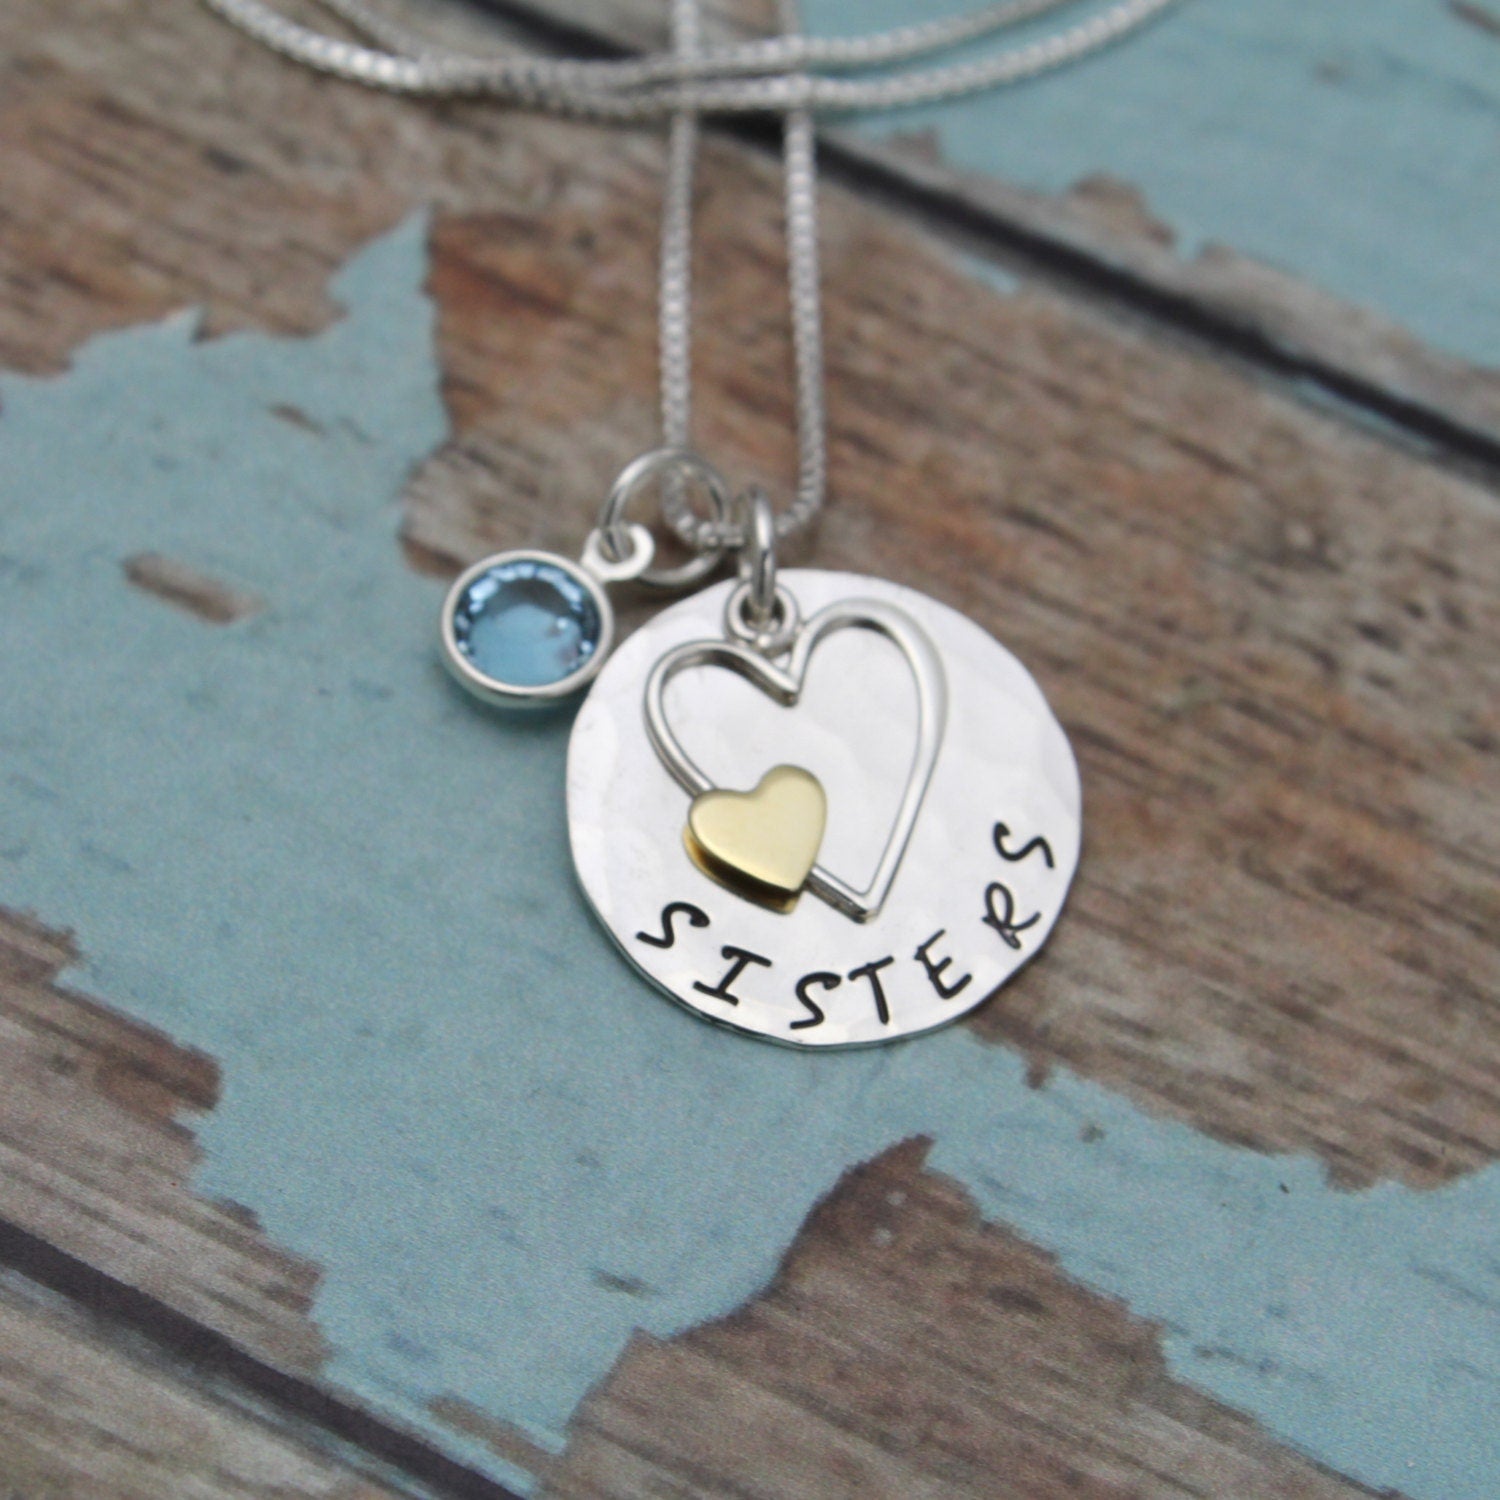 Silver Sister Necklace with Birthstone, Sister Gift, Sisters Necklace with Heart Charm, Hand Stamped, Personalized Sterling Silver Jewelry